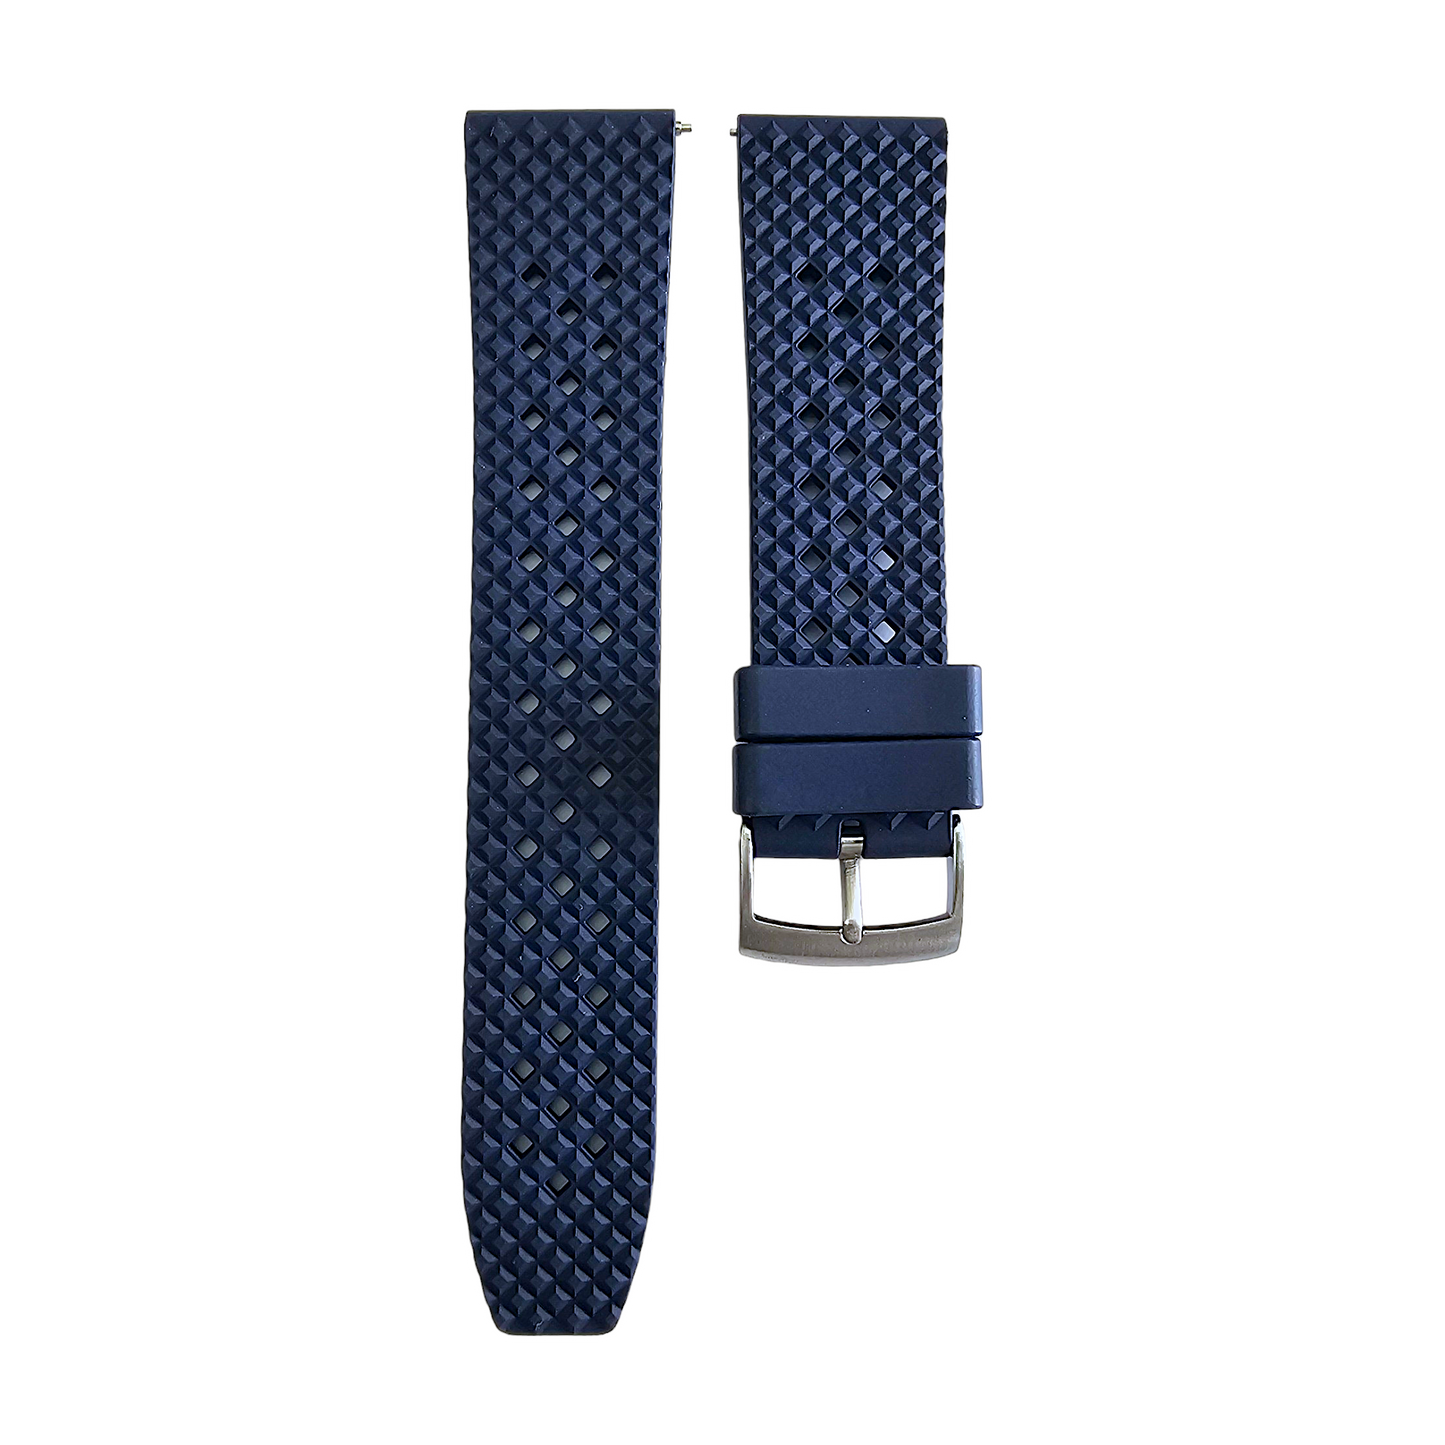 FKM Rubber Honeycomb Divers Watch Strap Band 20mm 22mm Blue